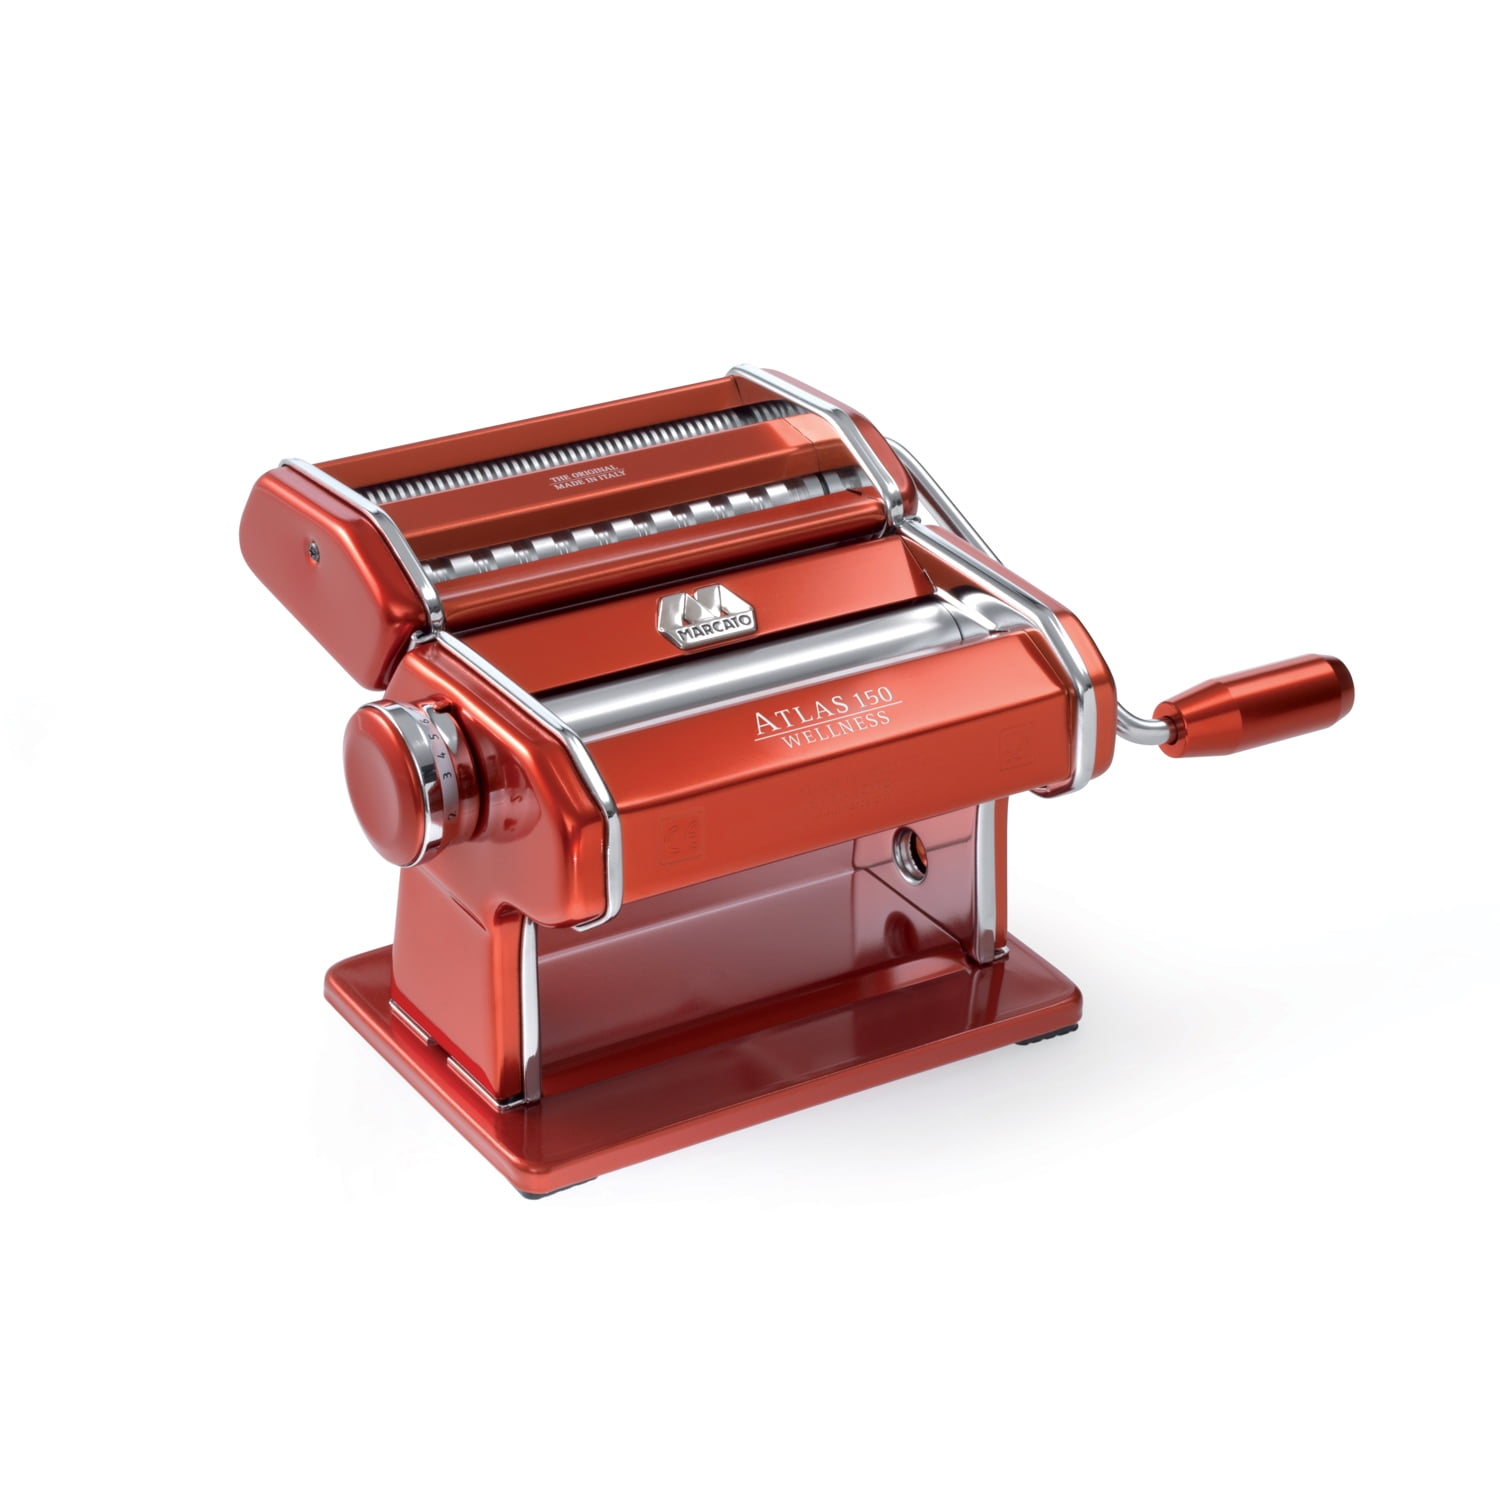 MARCATO Atlas 150 Machine, Made in Italy, Red  